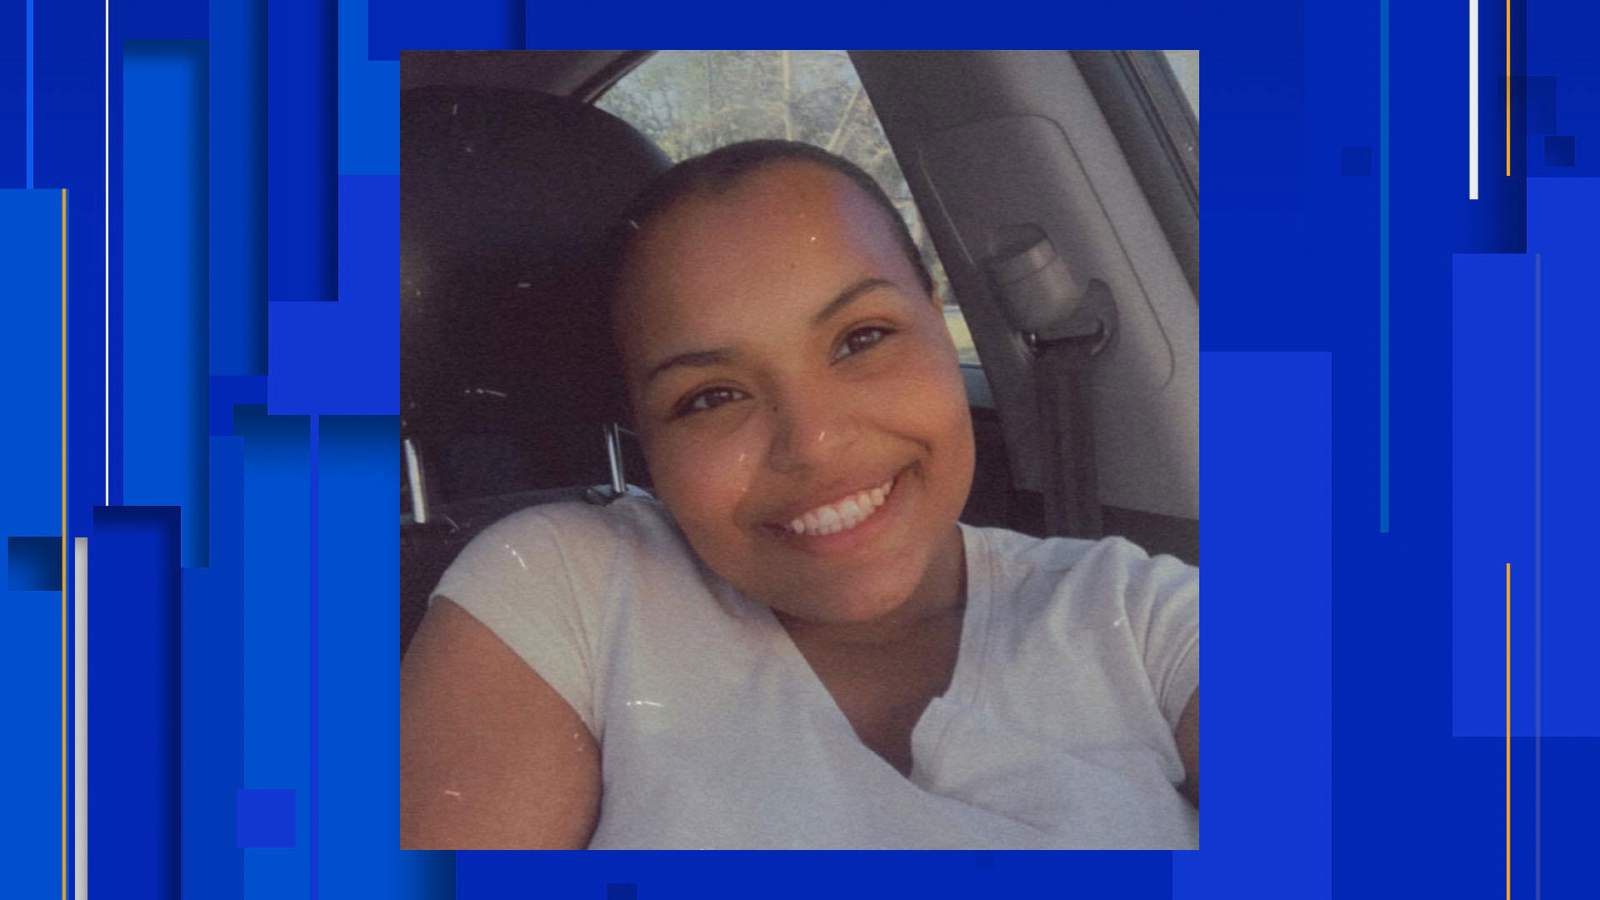 AMBER Alert for 17-year-old Virginia girl canceled